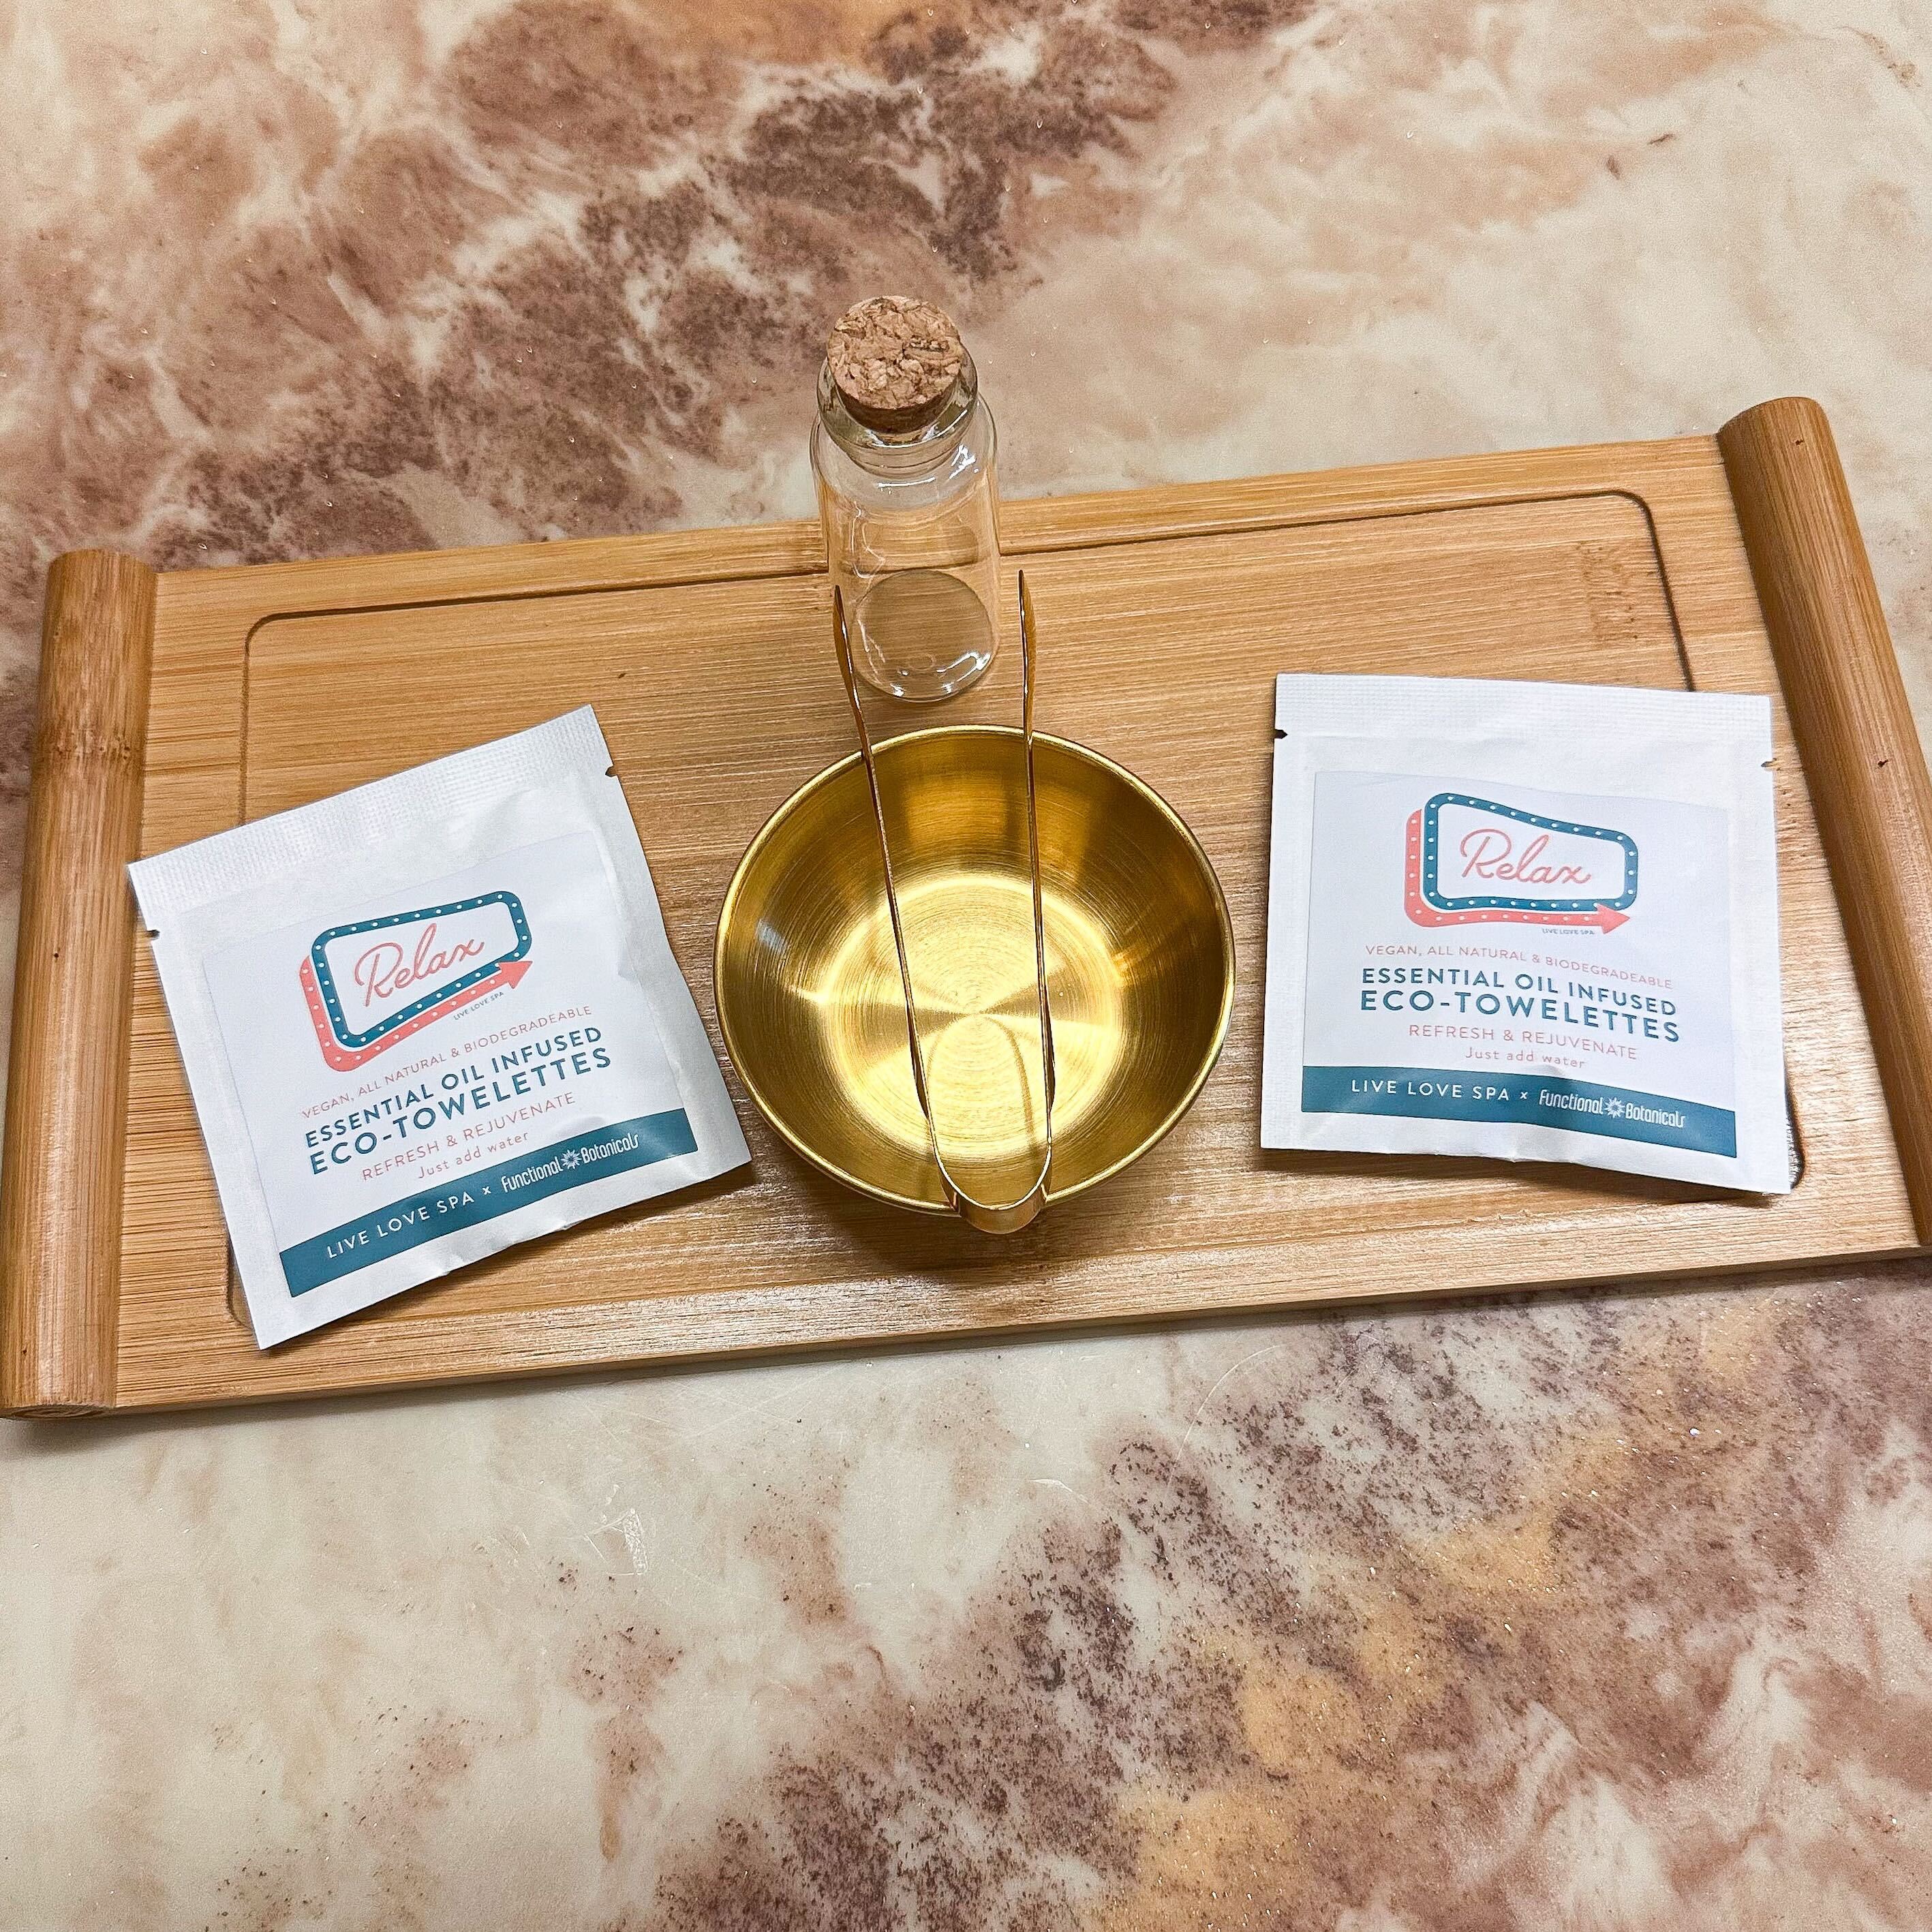 Essential Oil Infused Eco-Towelettes - Single Sachet | Live Love Spa x Functional Botanicals